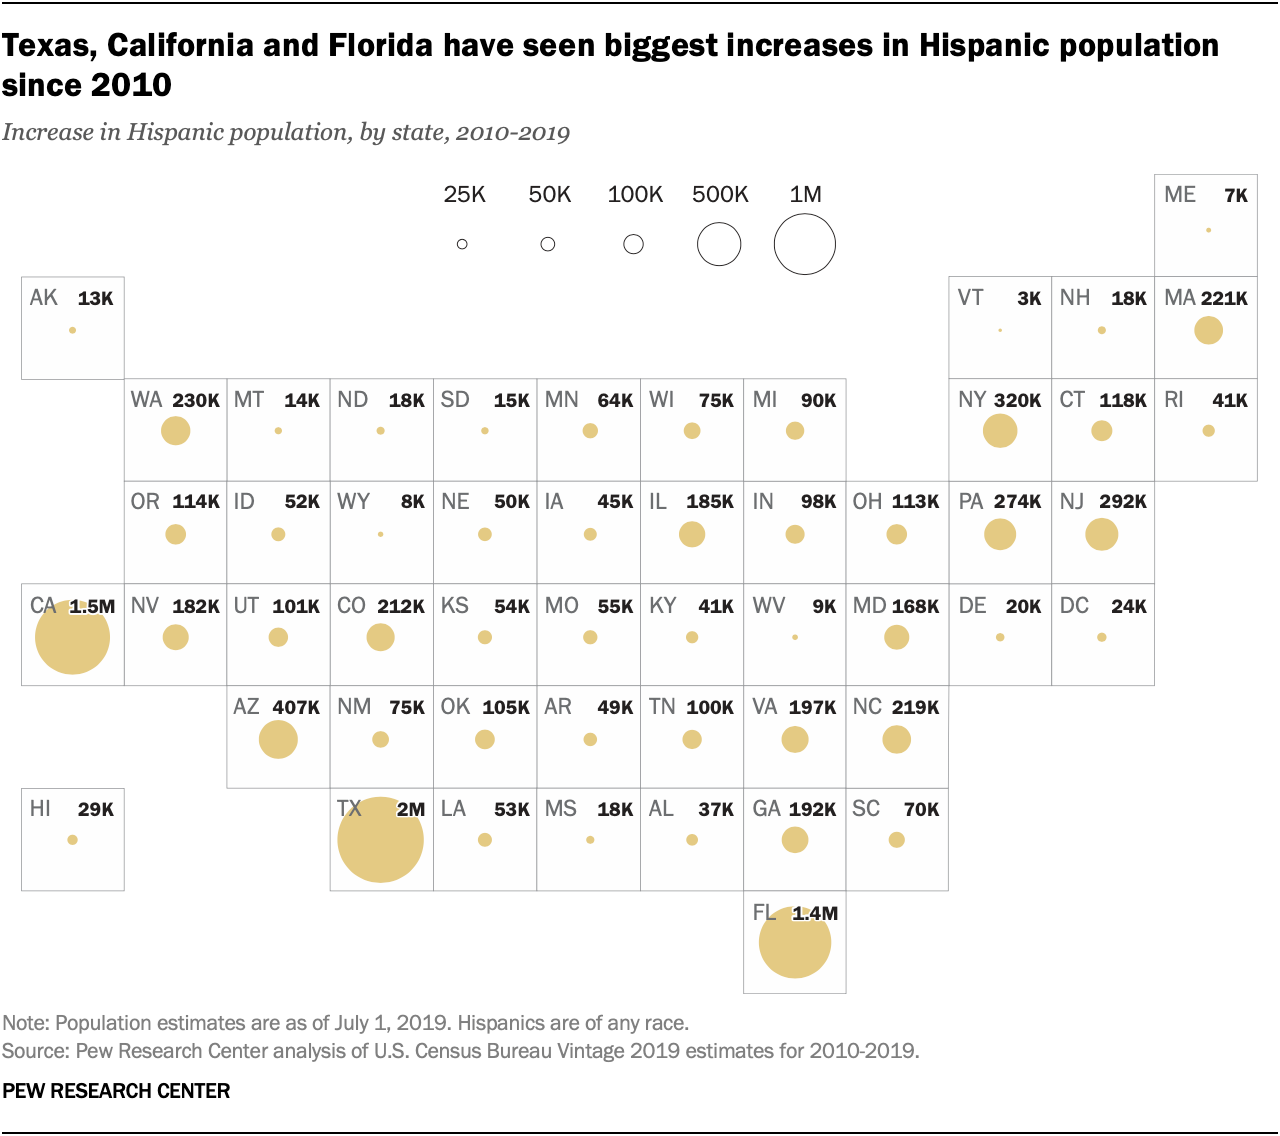 Texas, California and Florida have seen biggest increases in Hispanic population since 2010